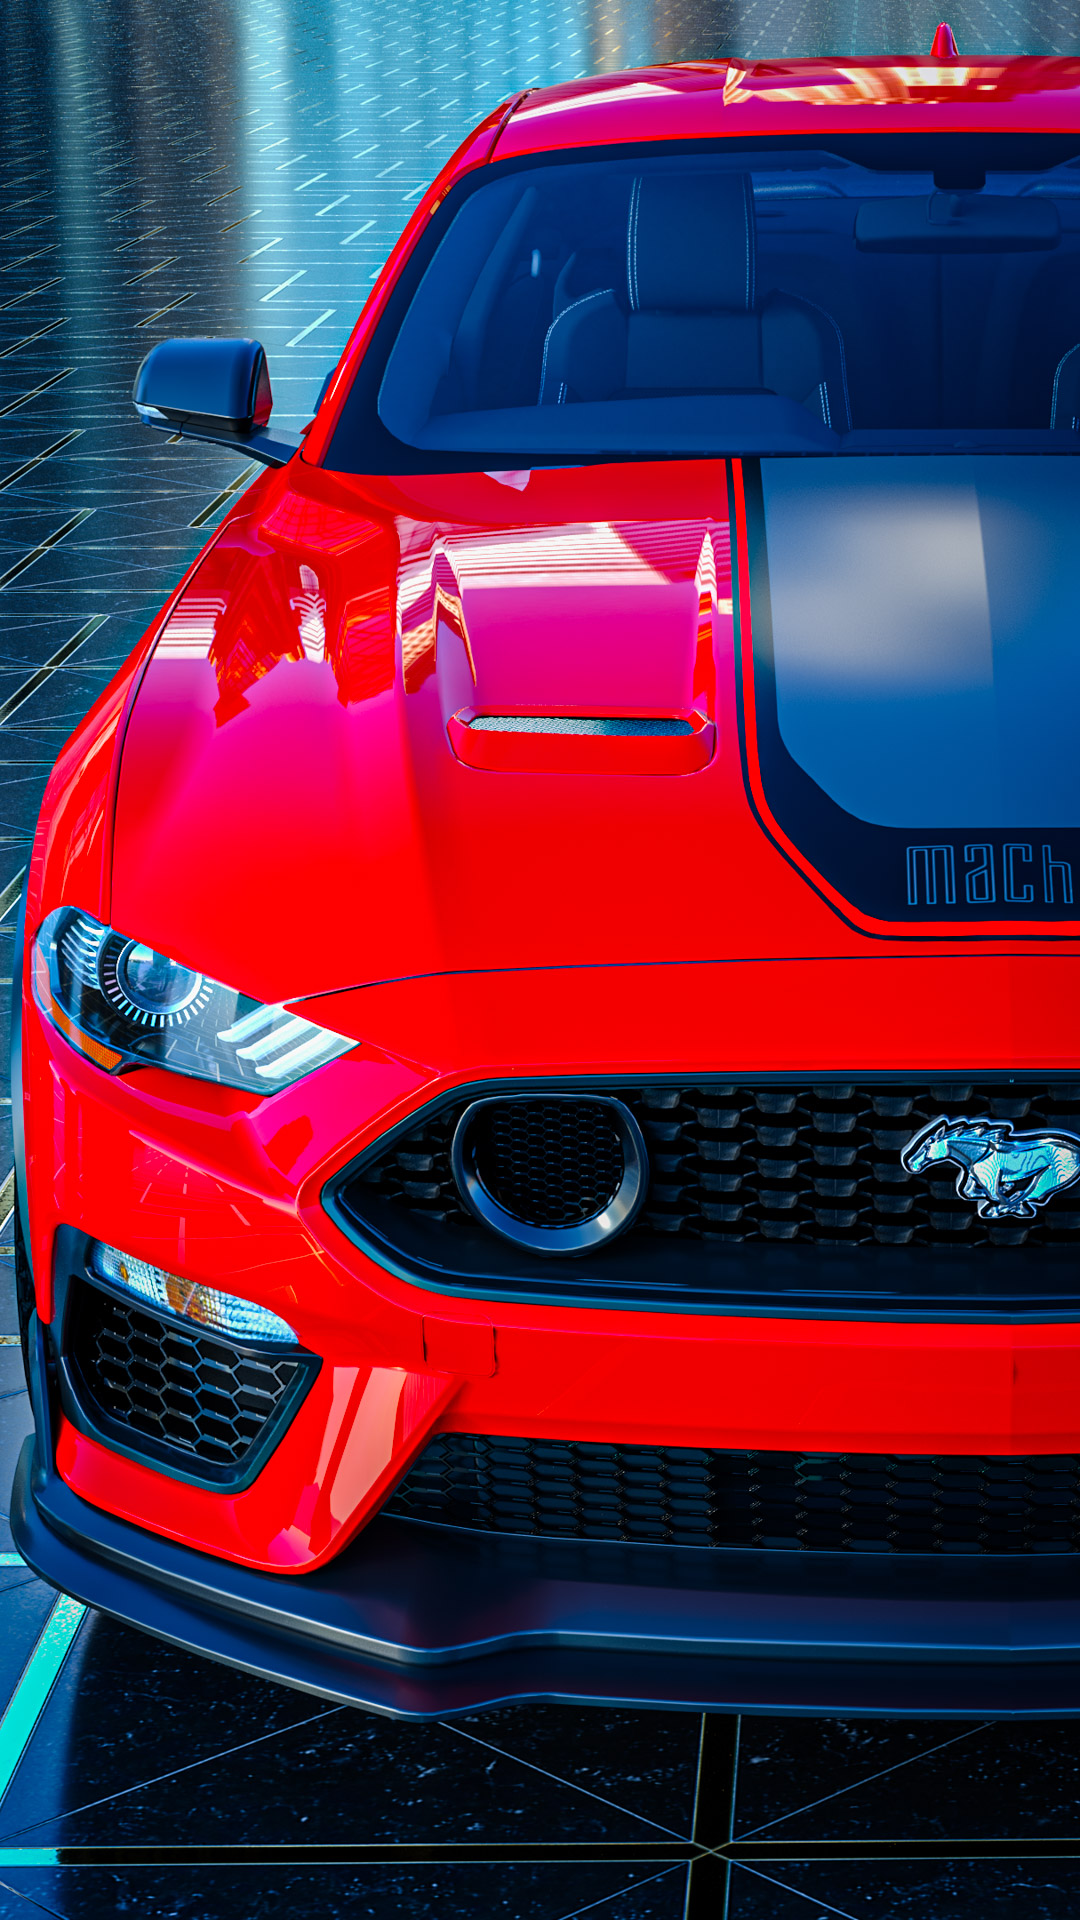 Experience the power of the Ford Mustang with our car wallpaper for iPhone, a testament to American engineering and performance.